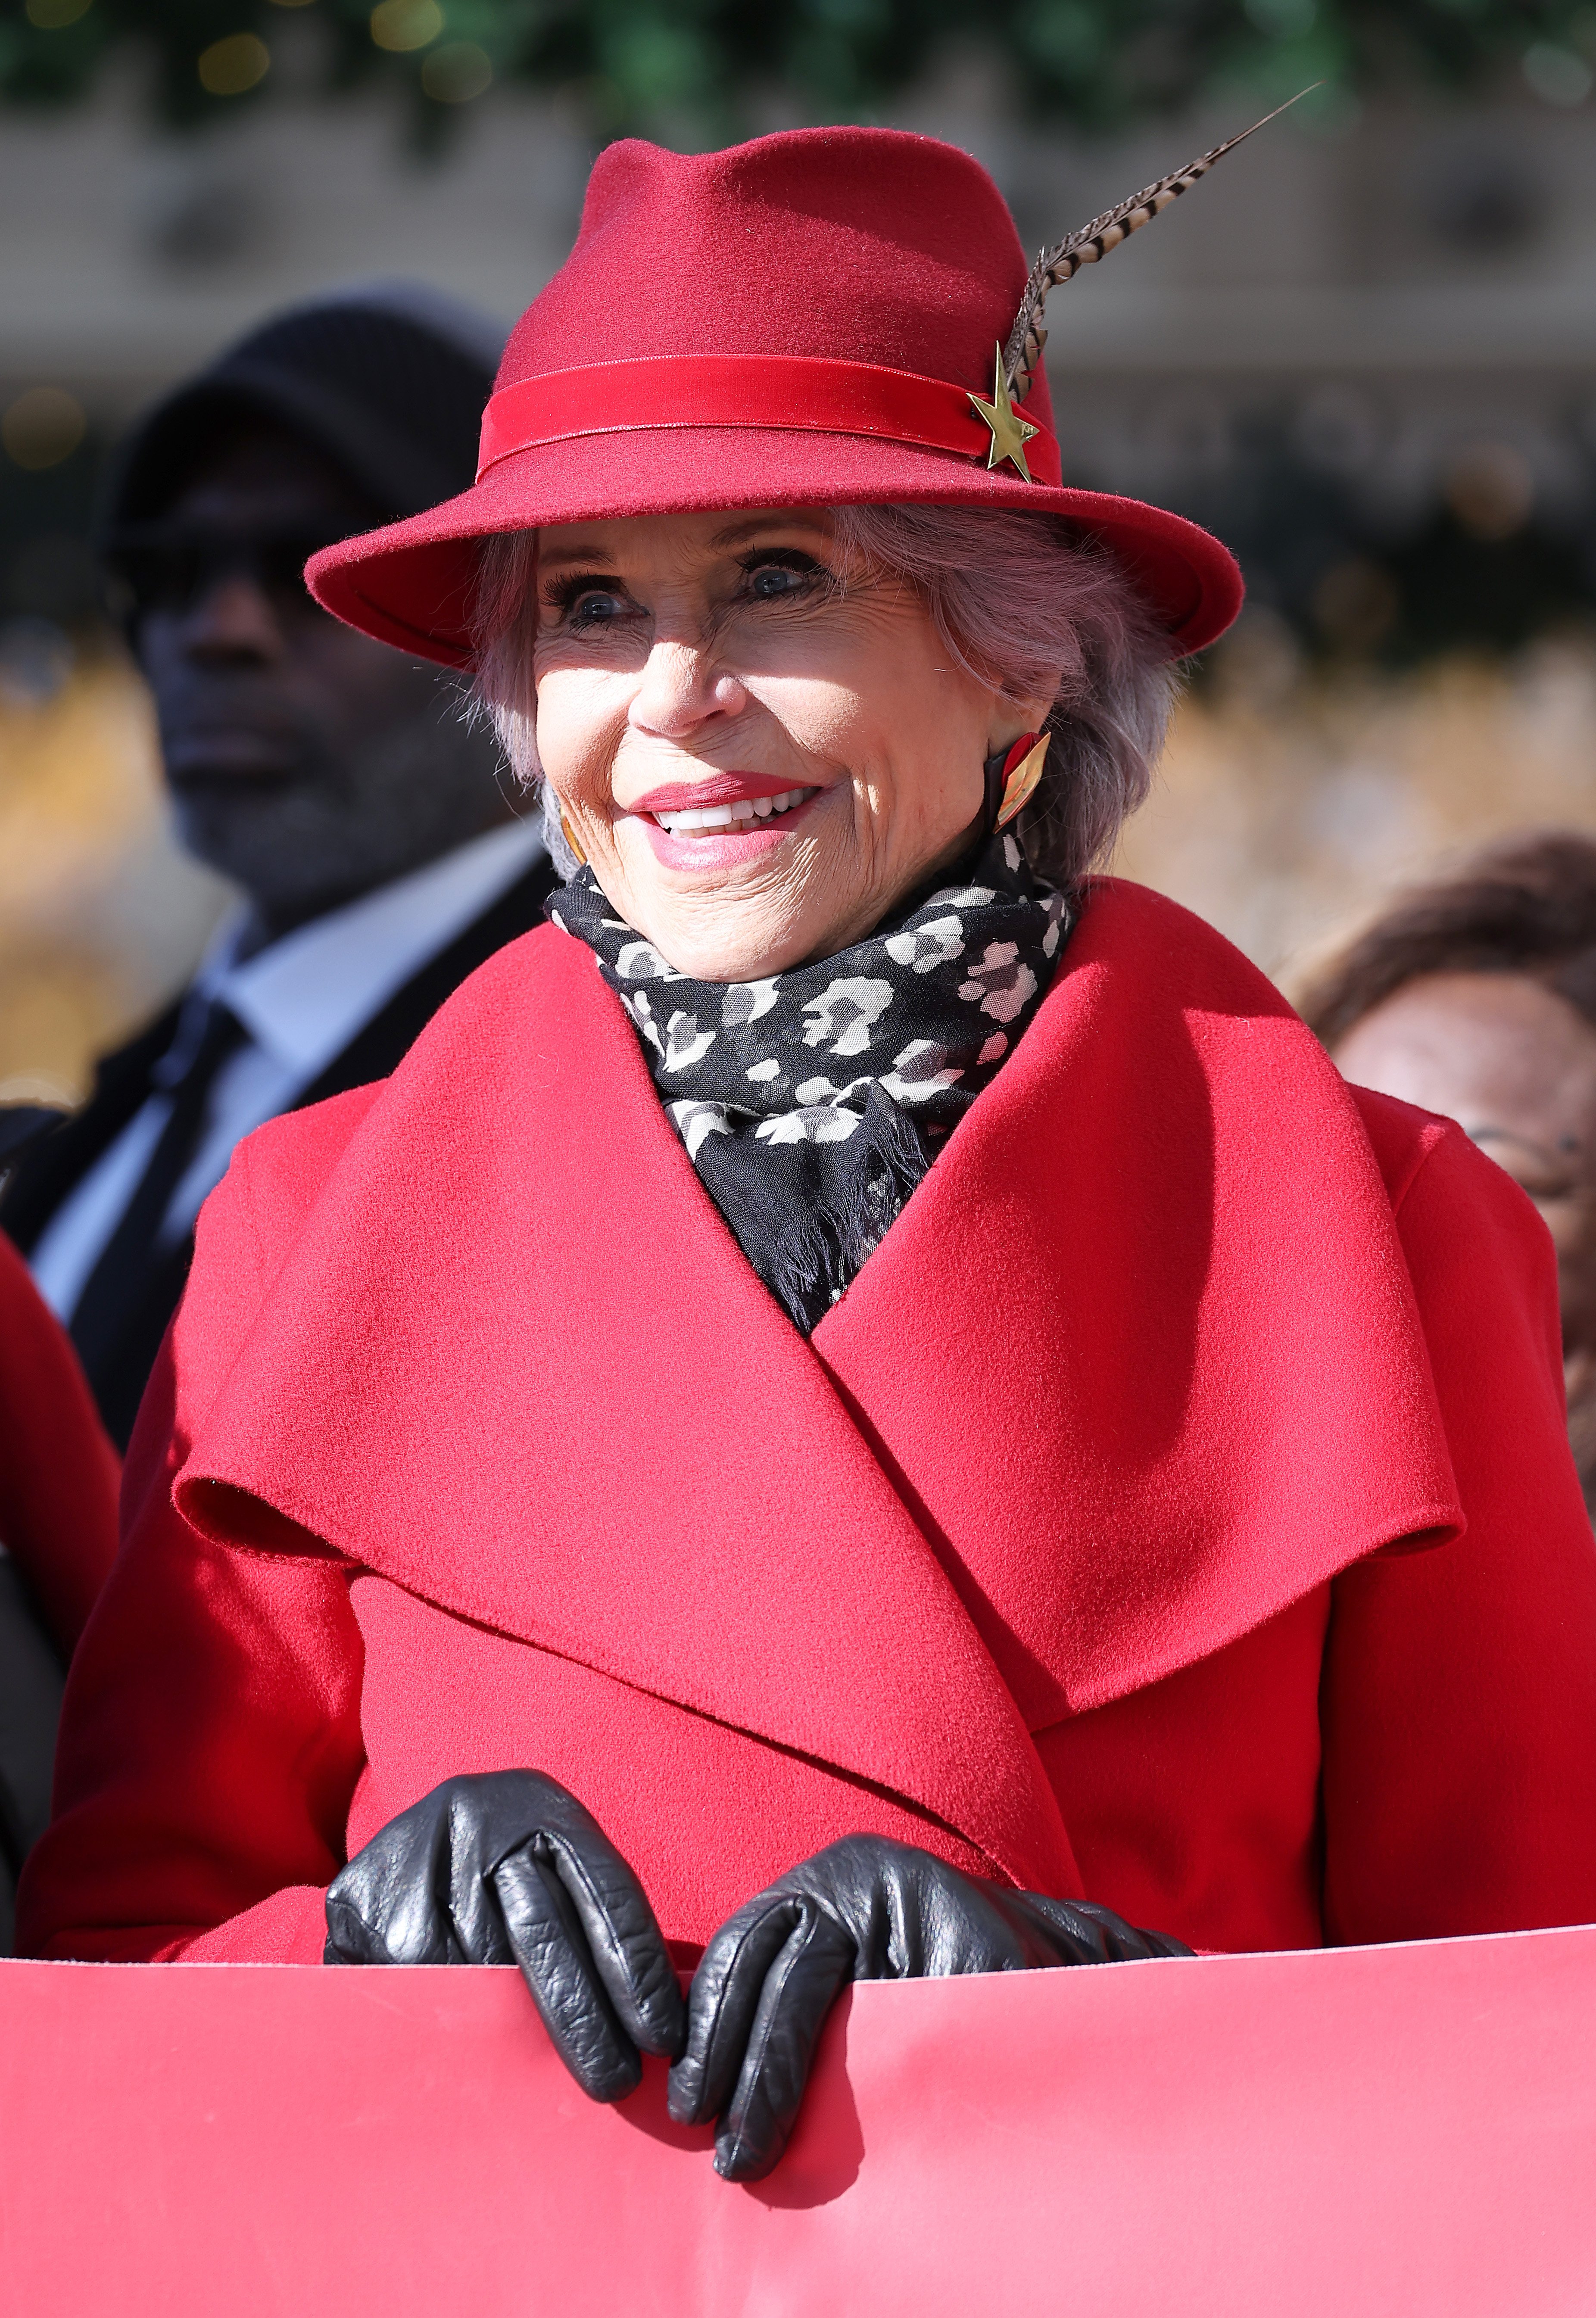 Jane Fonda hosts Fire Drill Fridays at a rally in Freedom Plaza on December 2, 2022, in Washington, DC. | Source: Getty Images